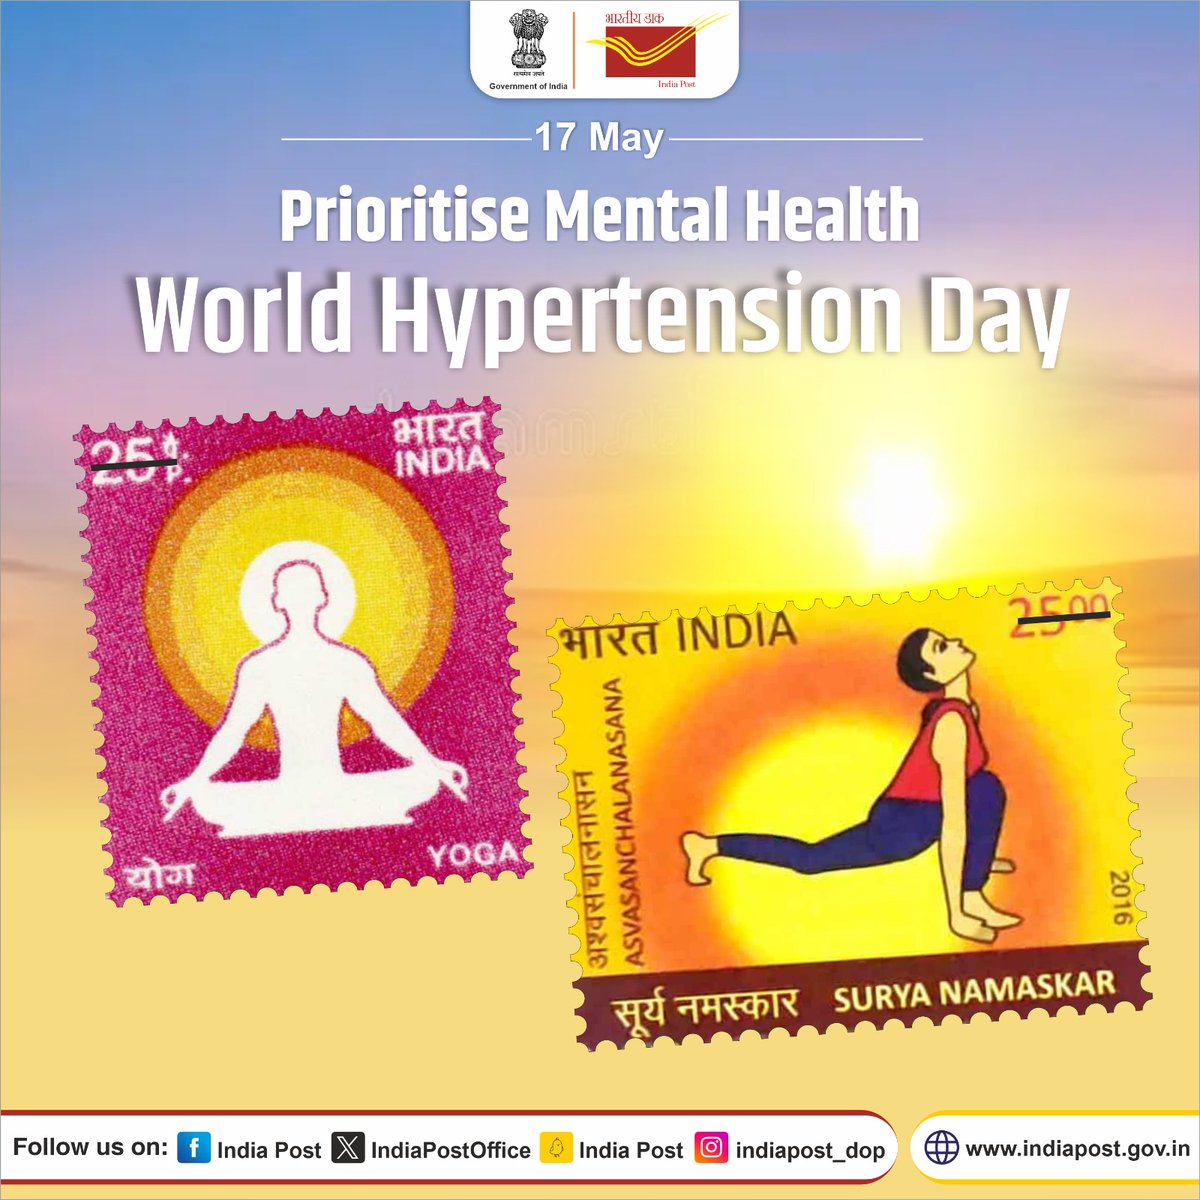 Let's raise awareness about the importance of good mental health and self care on this Hypertension Day. #HypertensionAwareness #HealthyMind